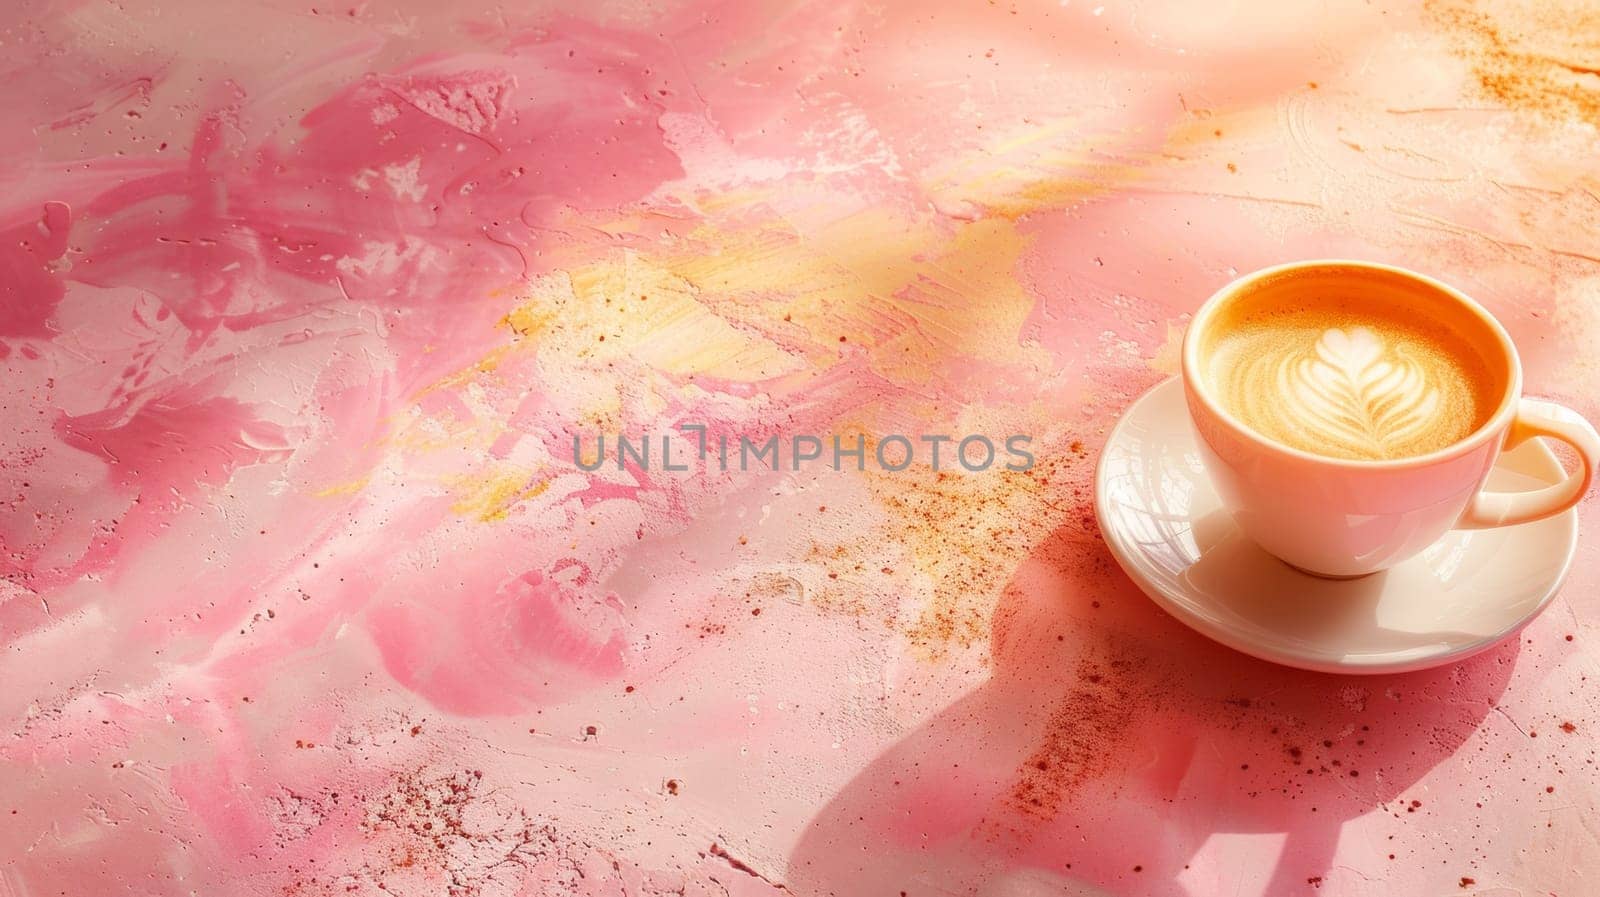 A cup of coffee on a saucer with pink paint splatter, AI by starush